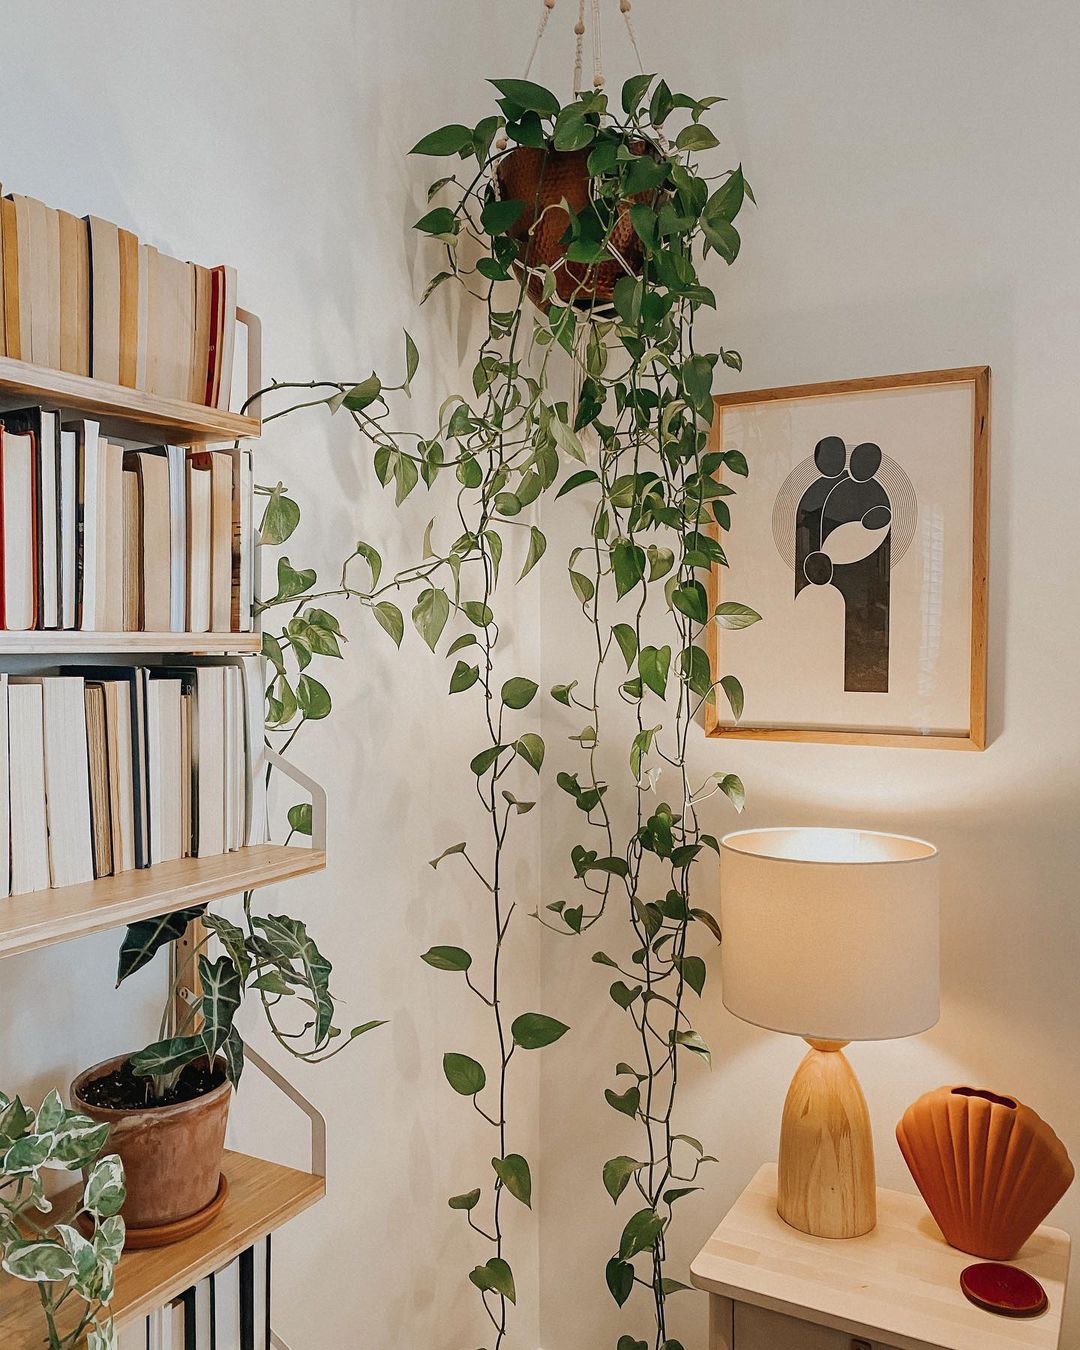 Corner of Japandi style room with a framed print and hanging pothos plant. Photo by Instagram user @coffeeandpoemss